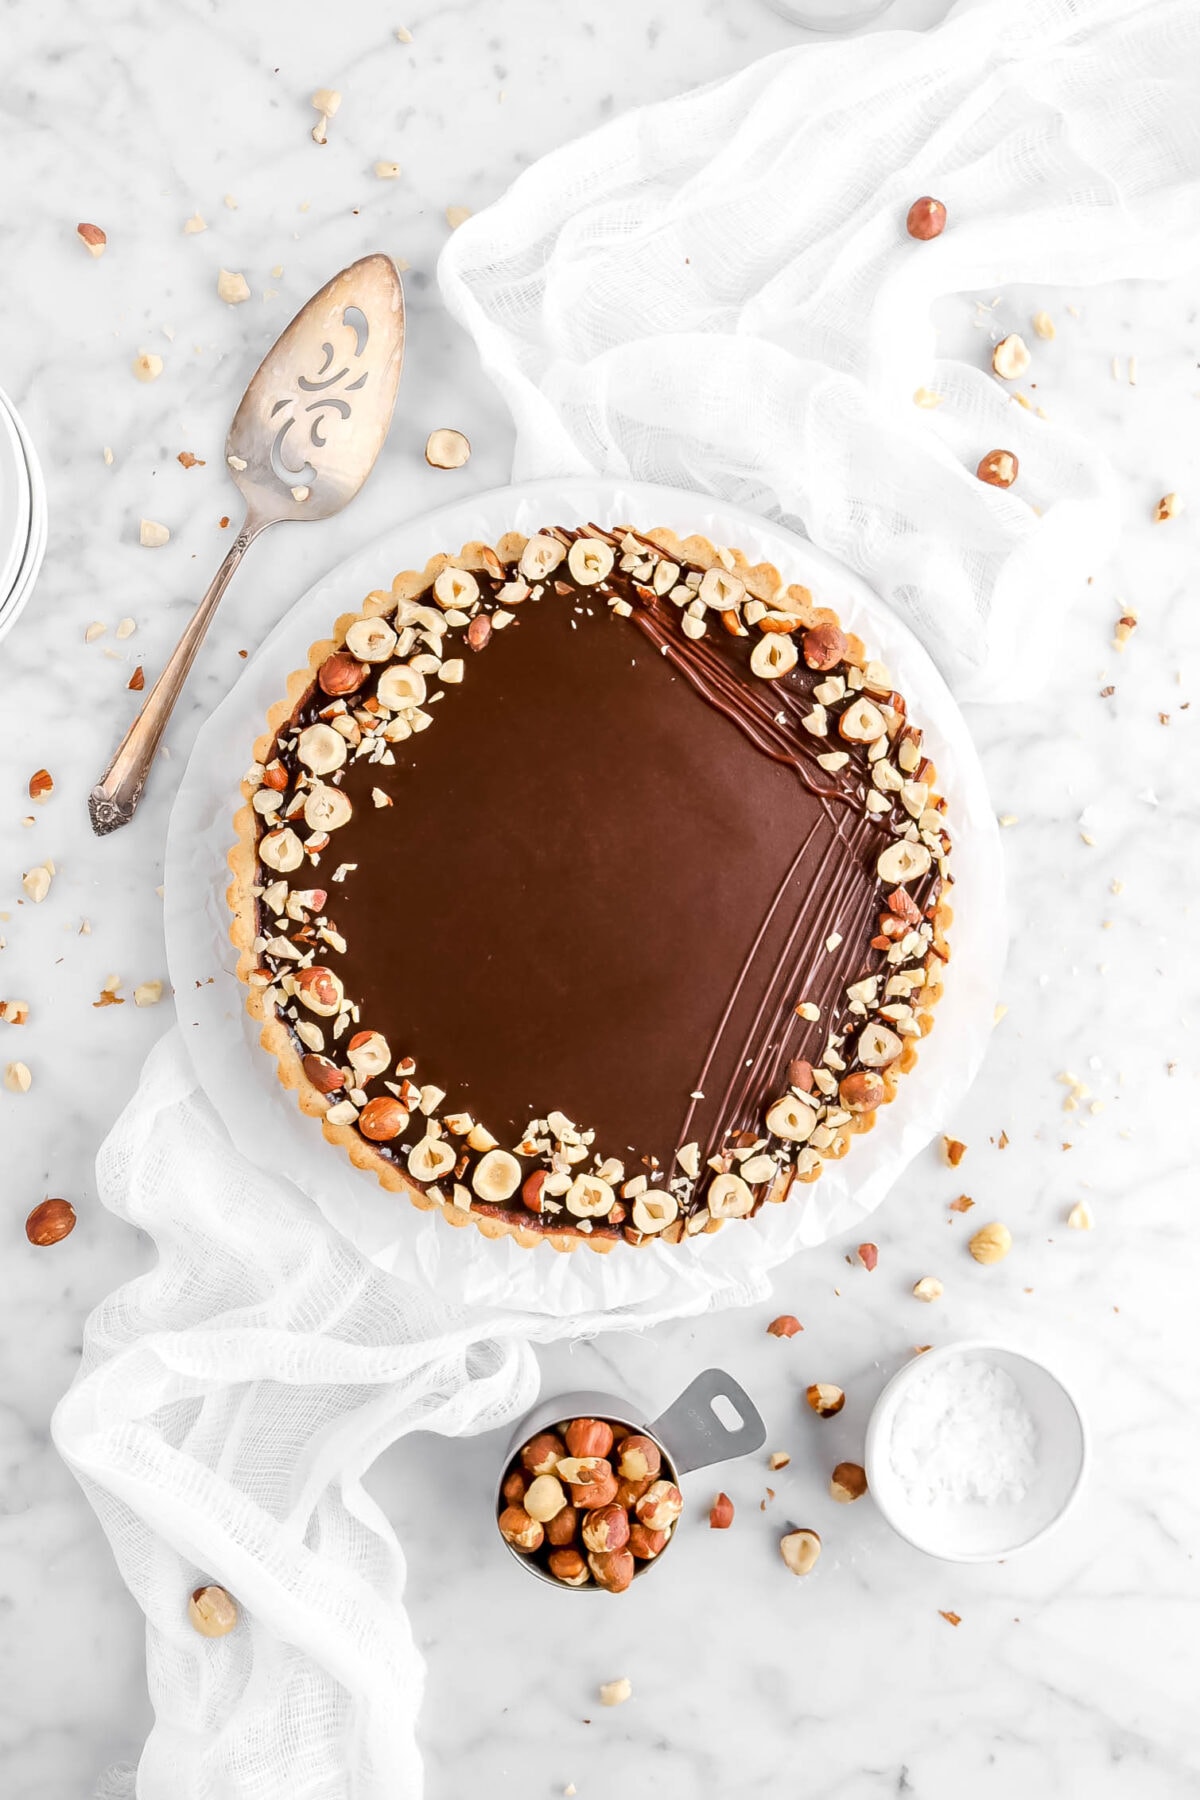 chocolate hazelnut tart with chocolate drizzle and hazelnuts on top with cake knife and white cheese cloth